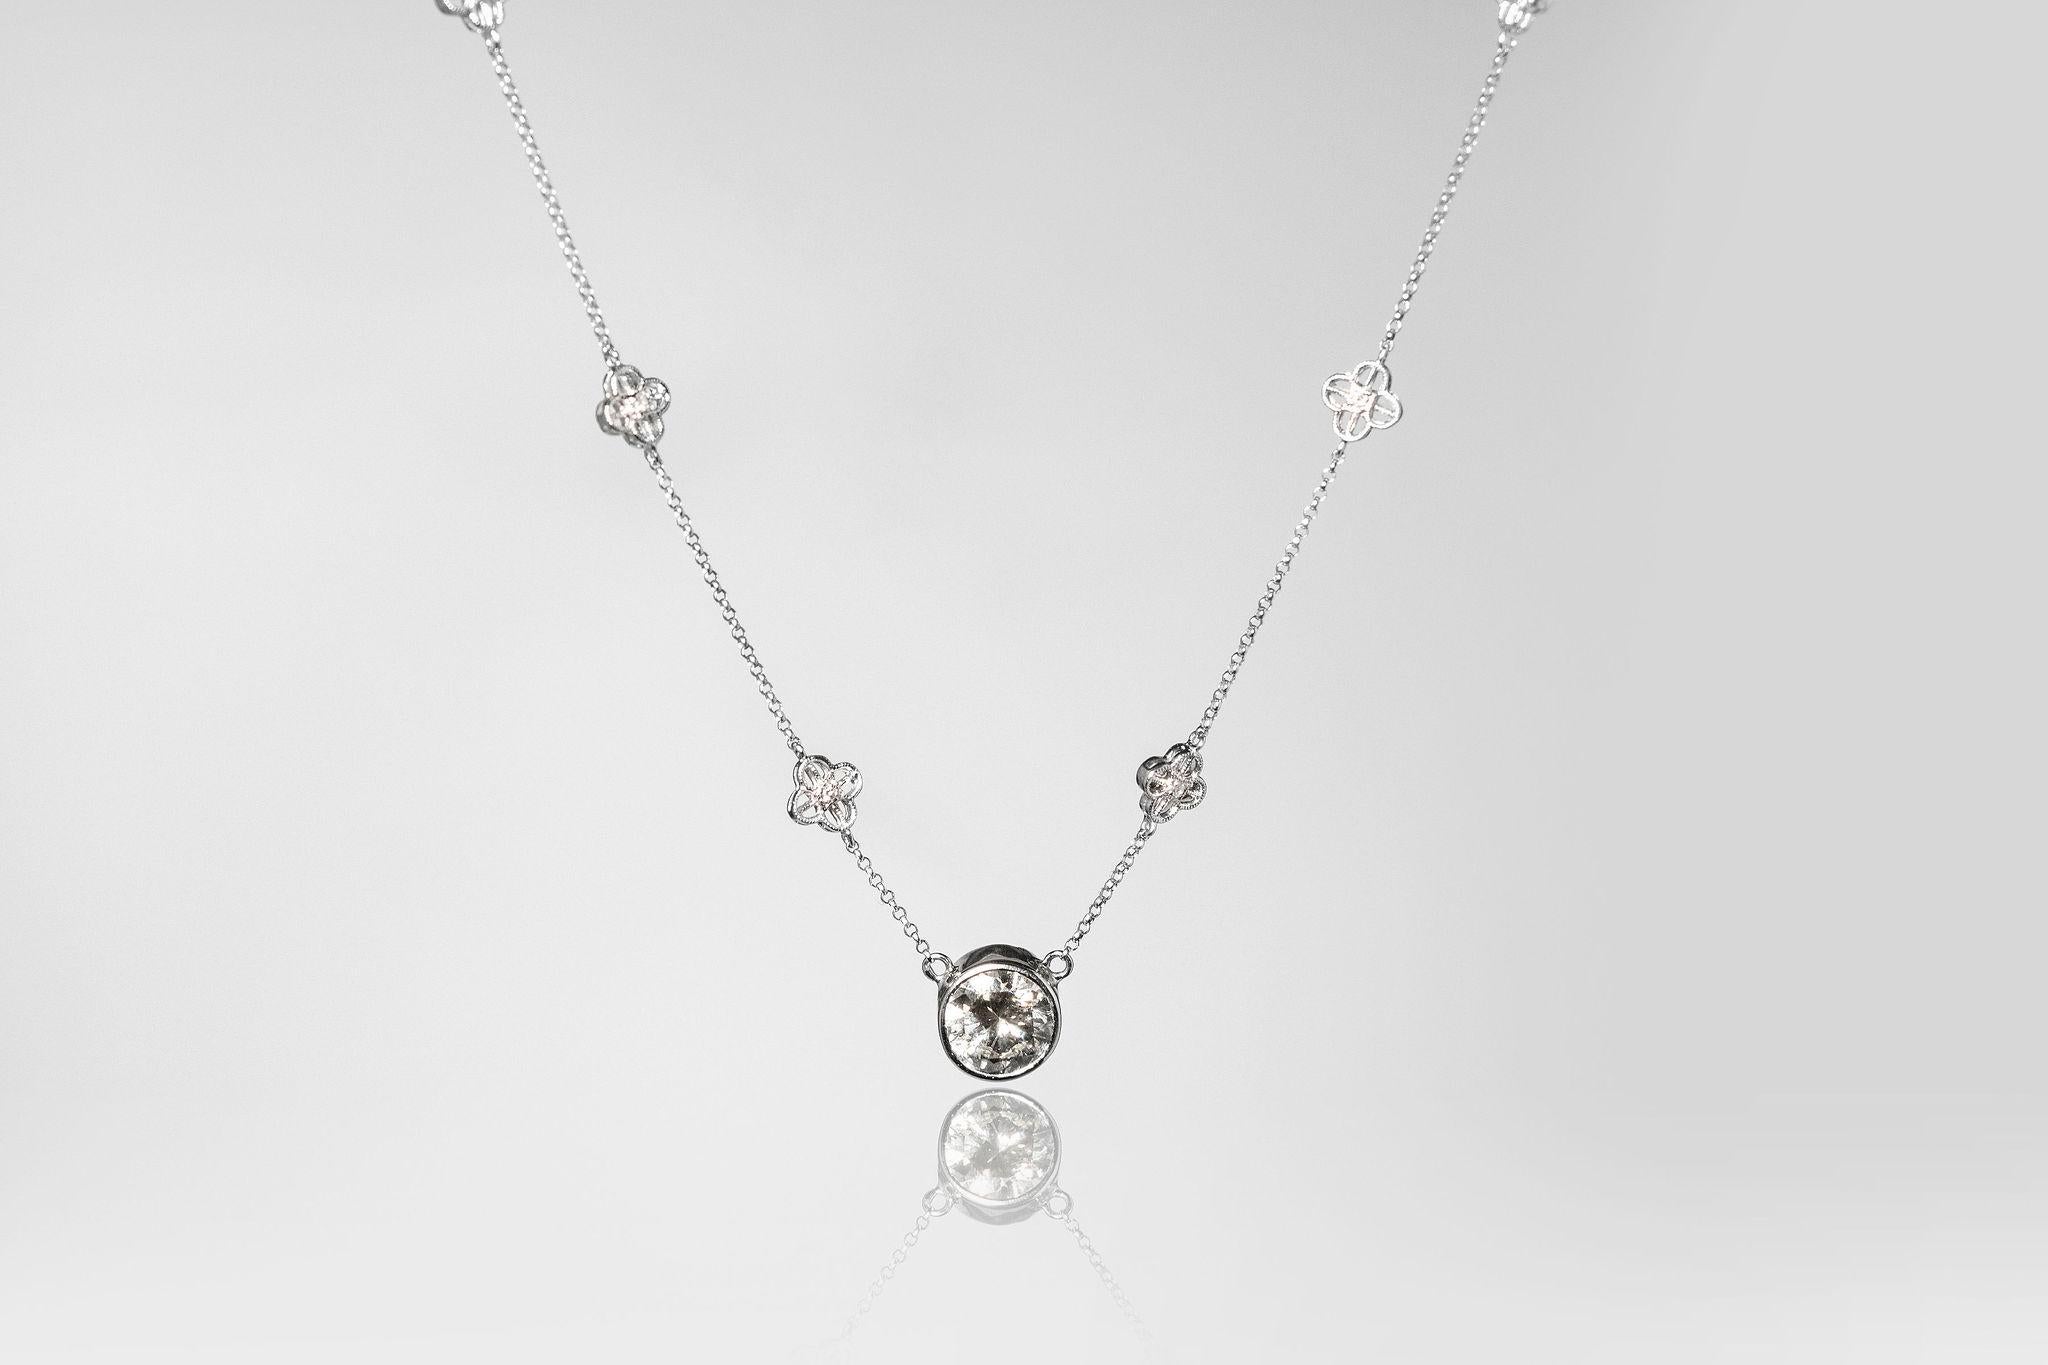 Magnificent 2.15ct centre stone round diamond is set in a 18k white gold bezel. Handmade in Paris France. The diamond shines magnificently on this handmade chain making this necklace glamours.   The chain has 10 small flowers. Each flower has a